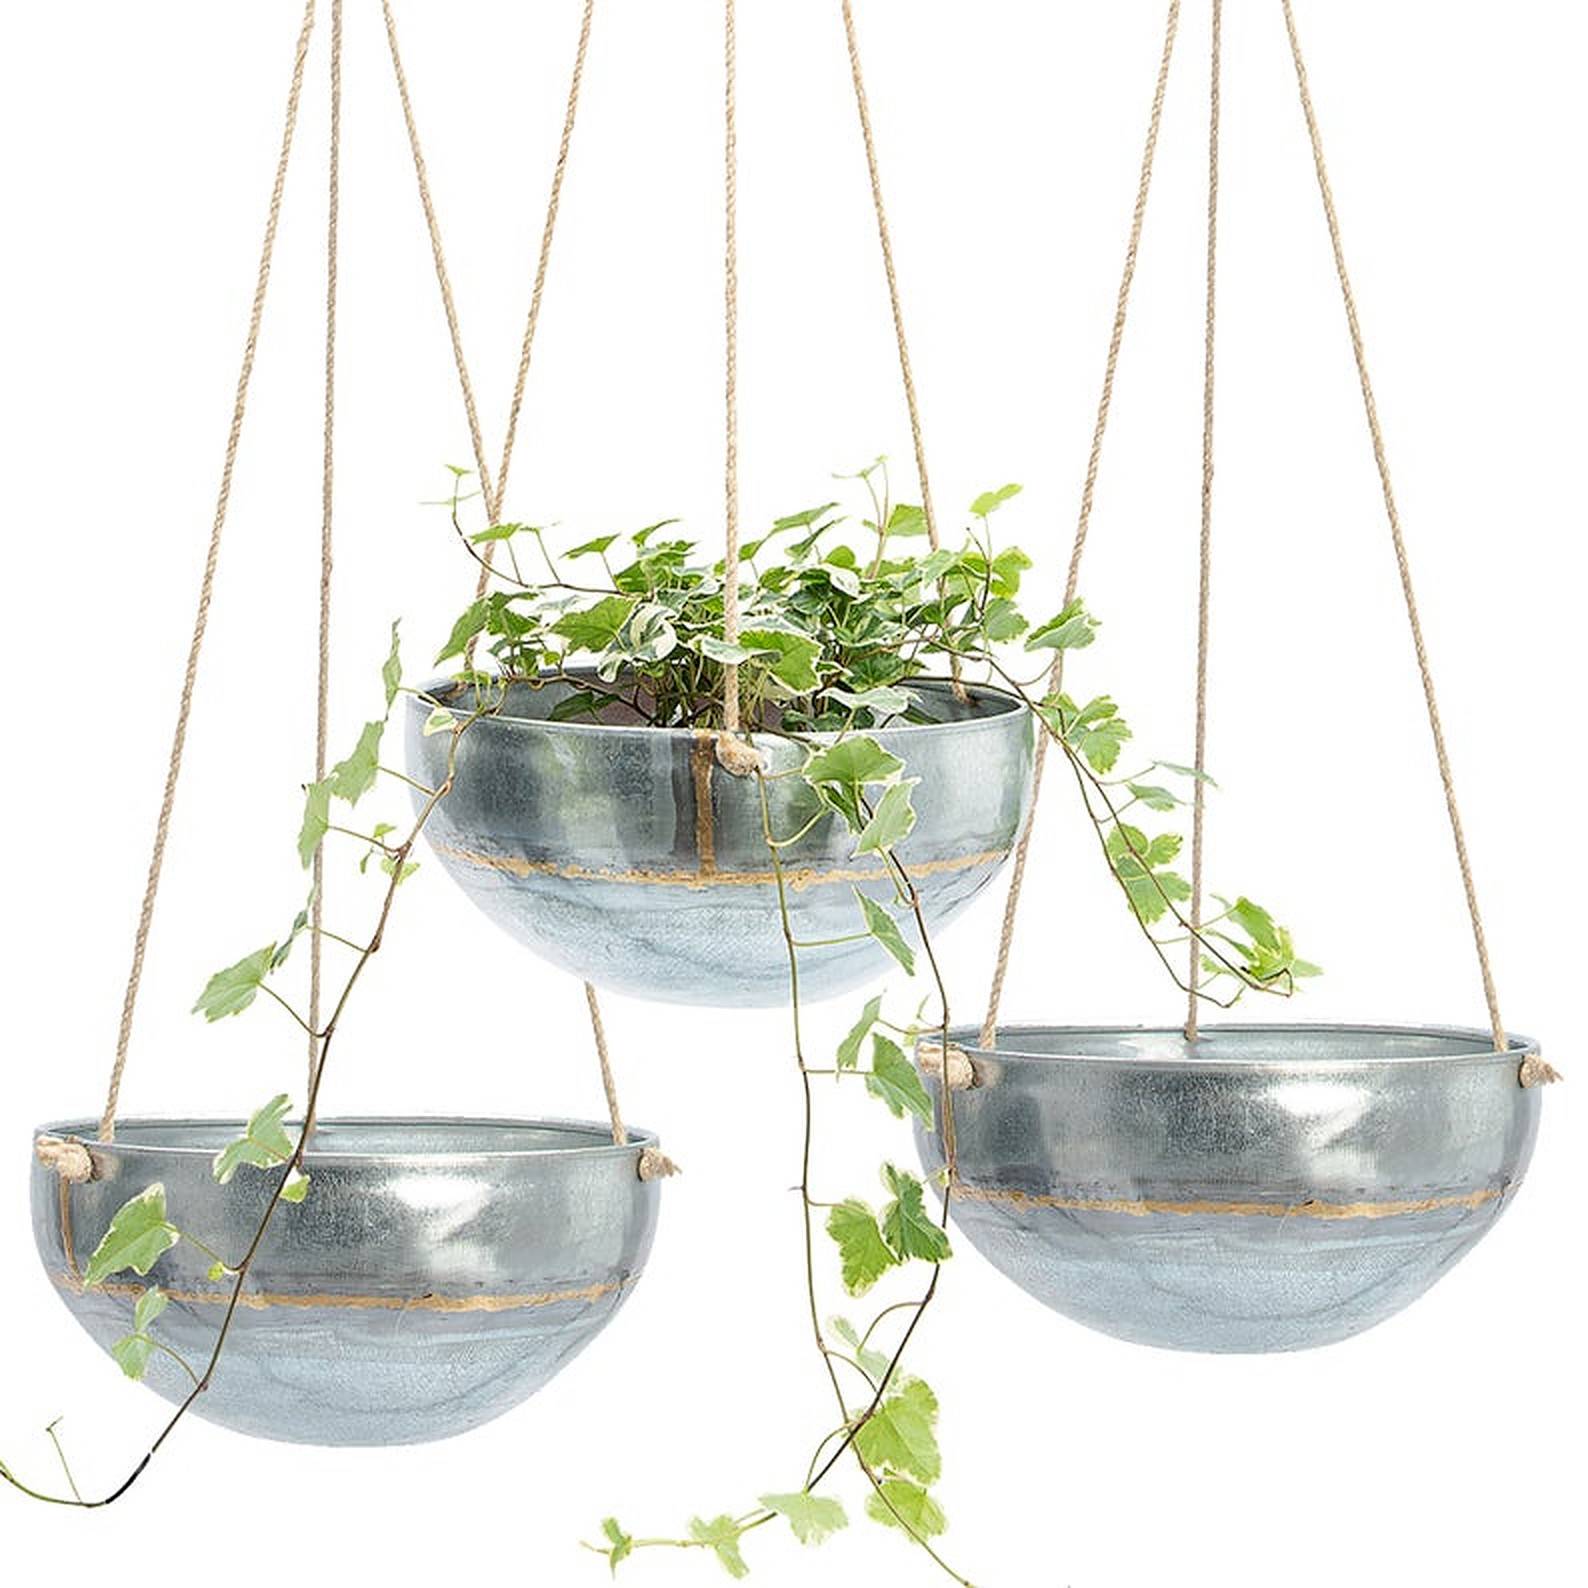 Three hanging planters with green plants